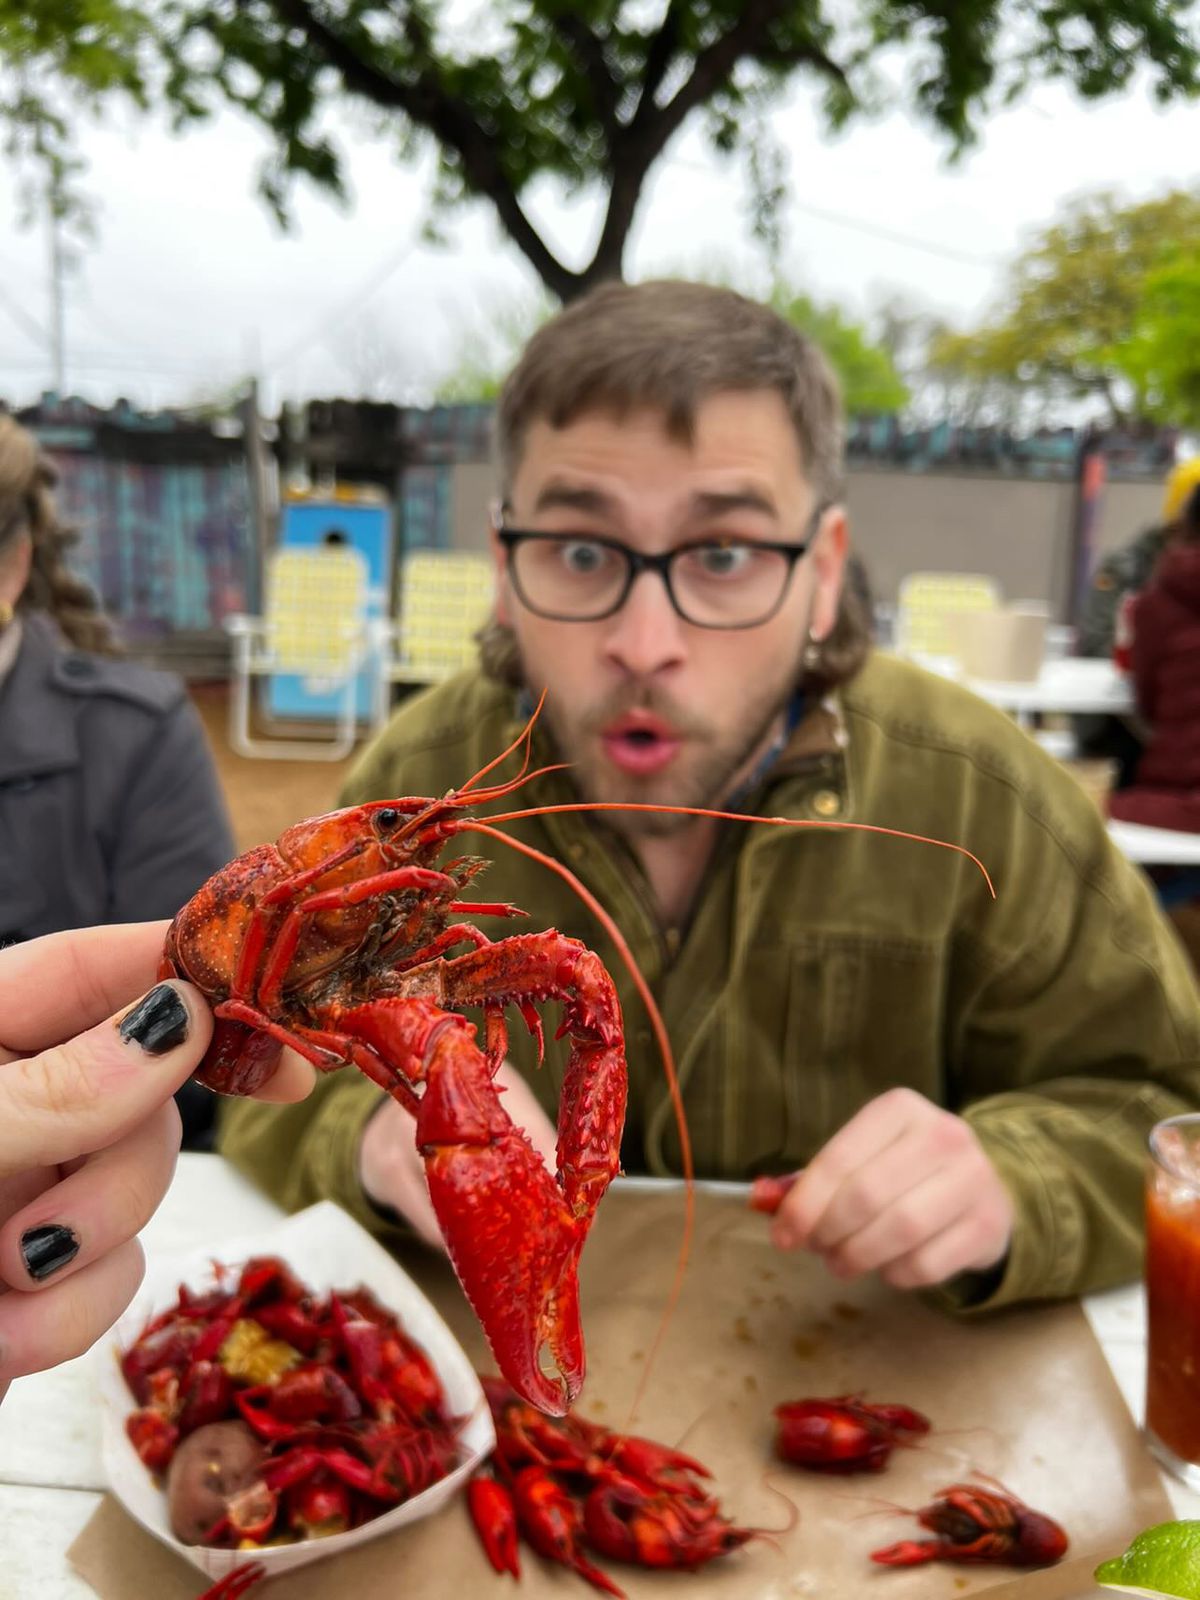 A person holding up a crawfish in front of another person.